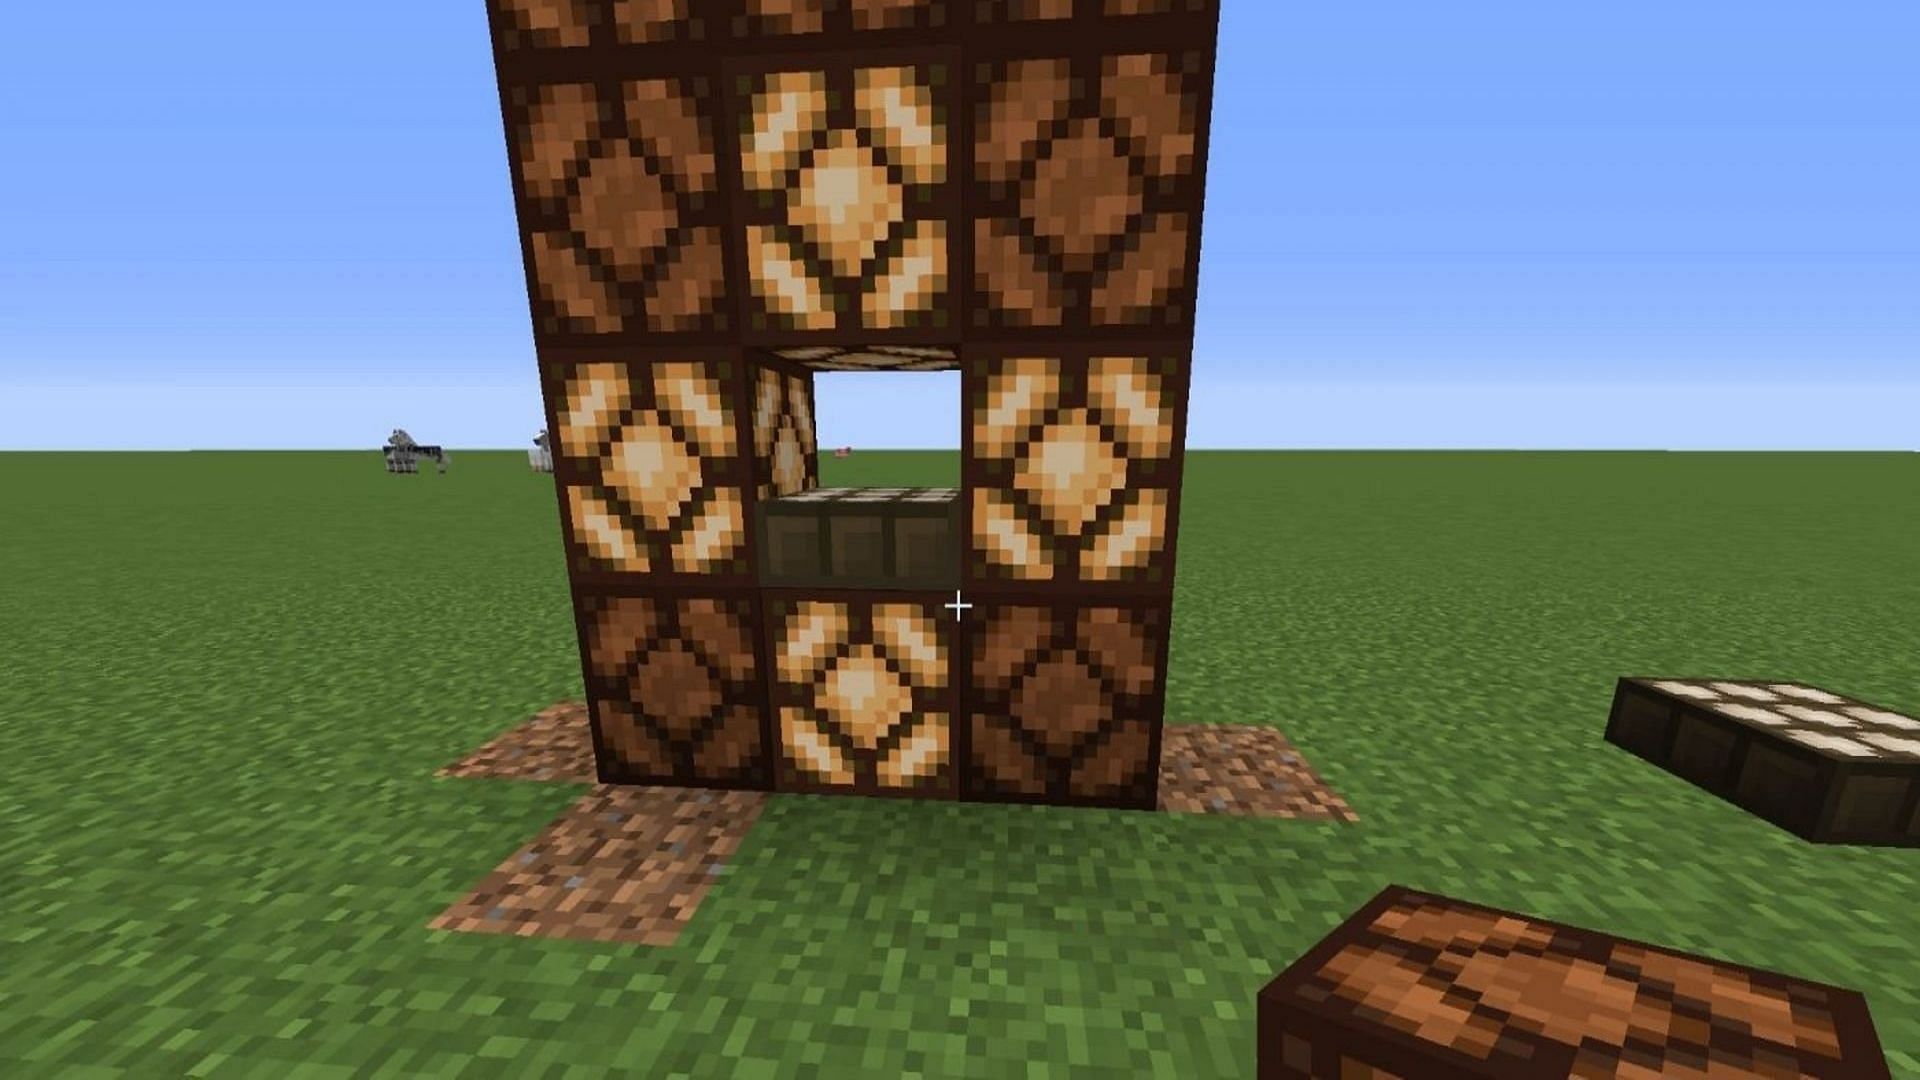 A daylight detector activating redstone lamps (Image via Studioccgames)